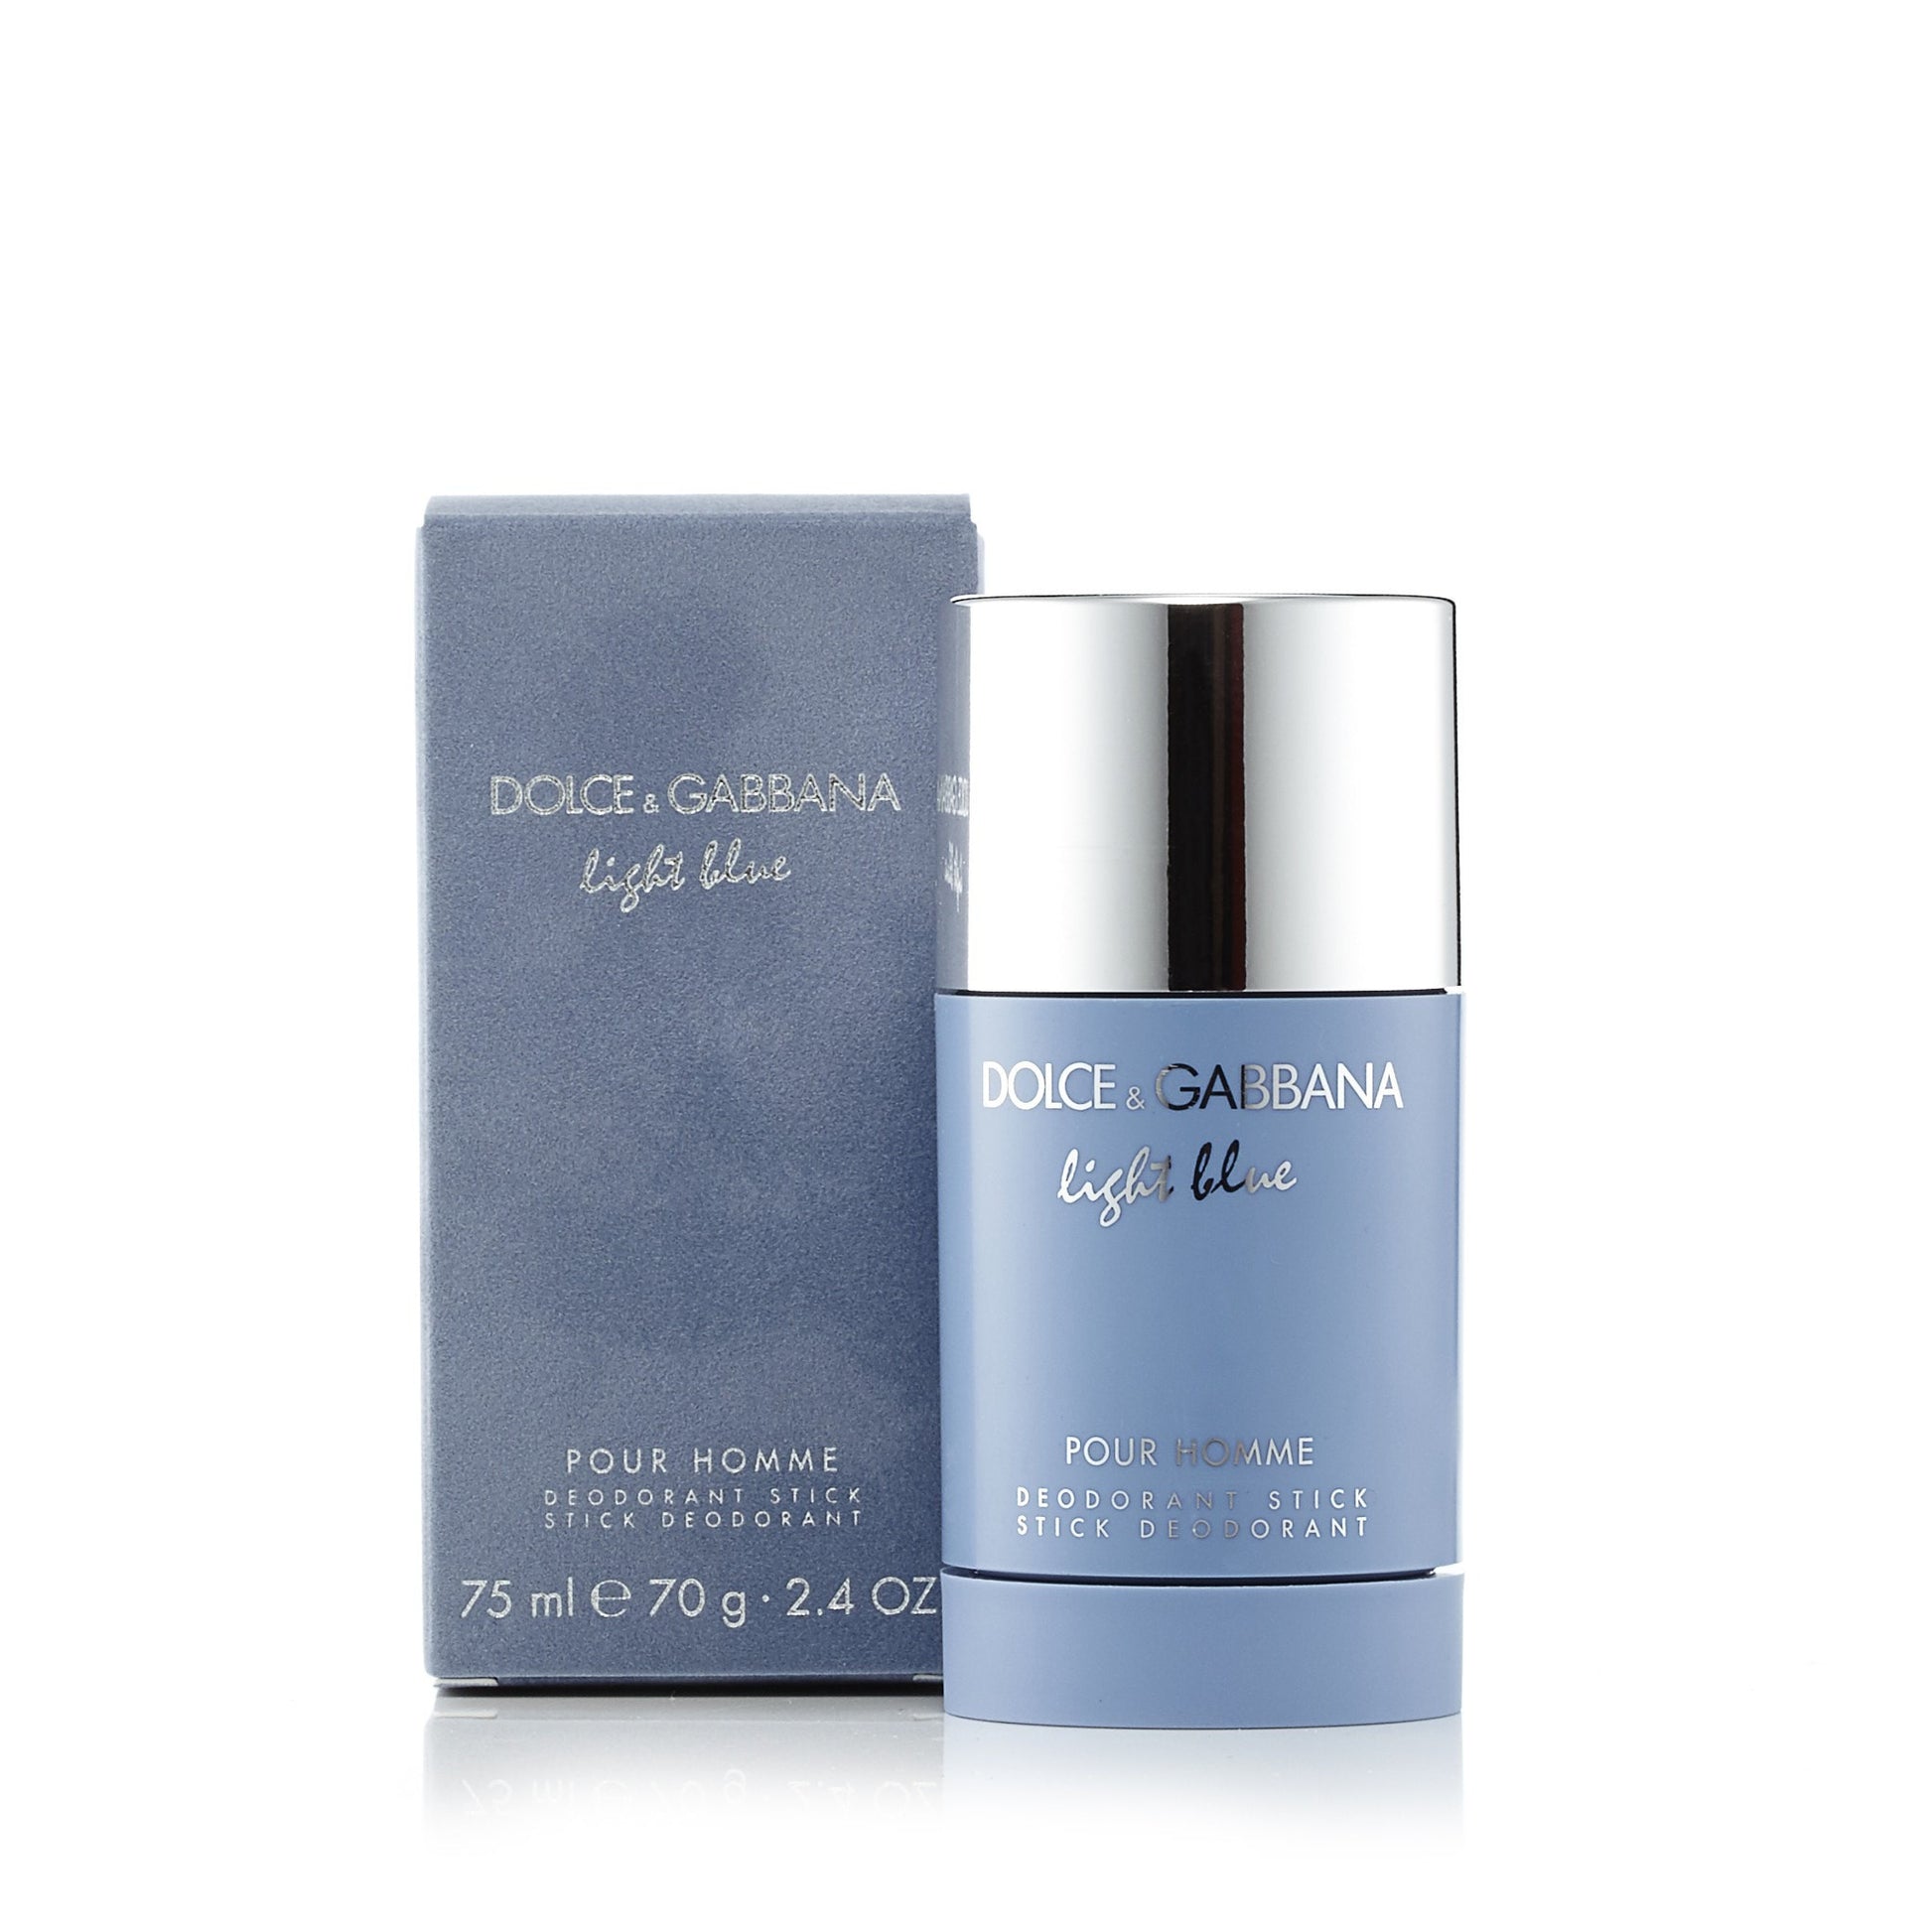 Light Blue Deodorant for Men by D&G 2.4 oz. Click to open in modal